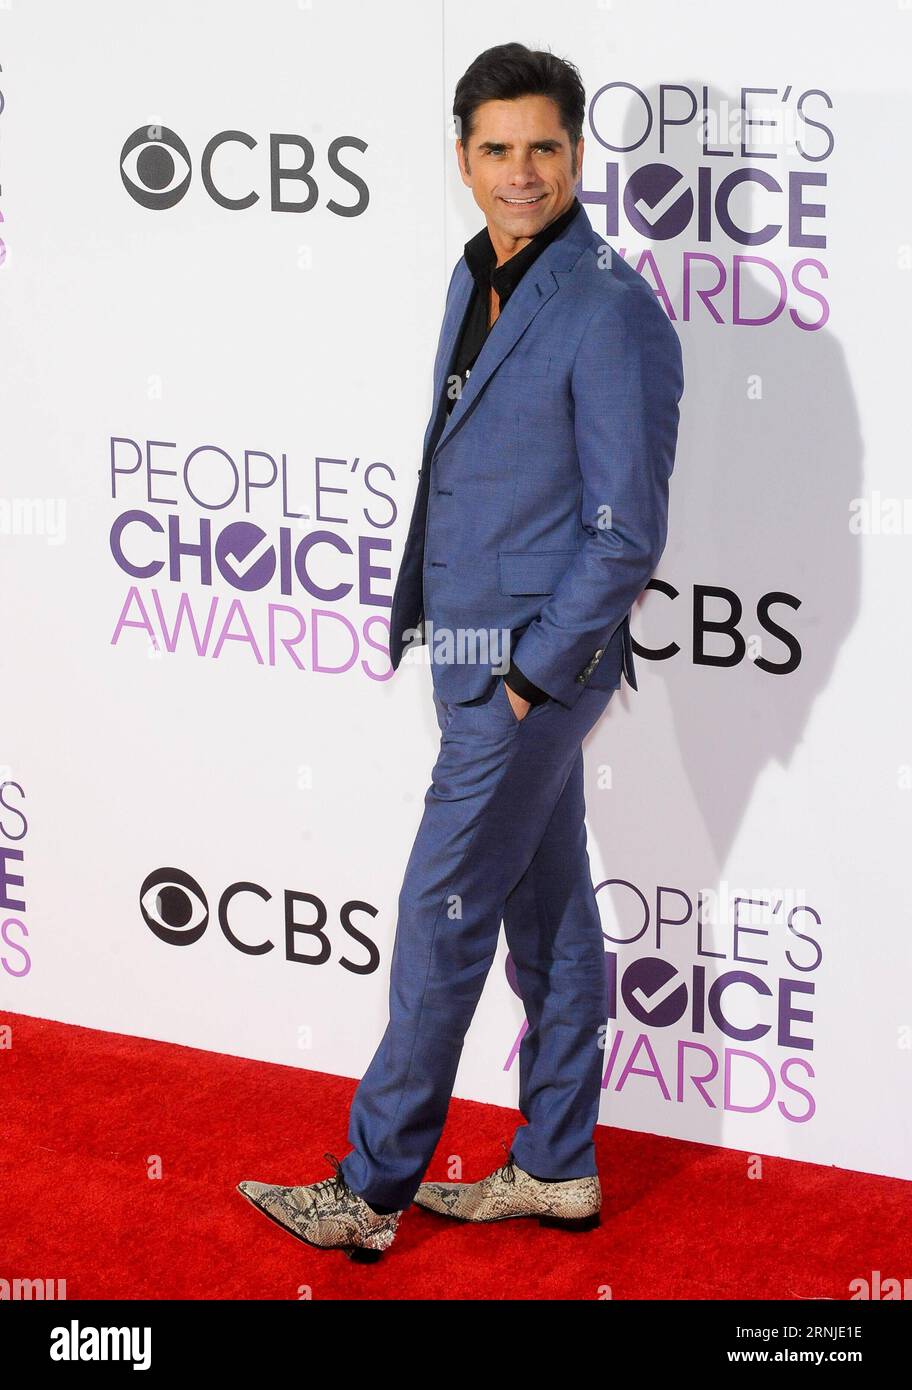 (170119) -- LOS ANGELES, Jan. 18, 2017 -- John Stamos arrives for the People s Choice Awards at the Microsoft Theater in Los Angeles, the United States, Jan. 18, 2017. ) (djj) U.S.-LOS ANGELES-PEOPLE S CHOICE AWARDS ZhangxChaoqun PUBLICATIONxNOTxINxCHN   Los Angeles Jan 18 2017 John Stamos arrives for The Celebrities S Choice Awards AT The Microsoft Theatre in Los Angeles The United States Jan 18 2017 djj U S Los Angeles Celebrities S Choice Awards ZhangxChaoqun PUBLICATIONxNOTxINxCHN Stock Photo